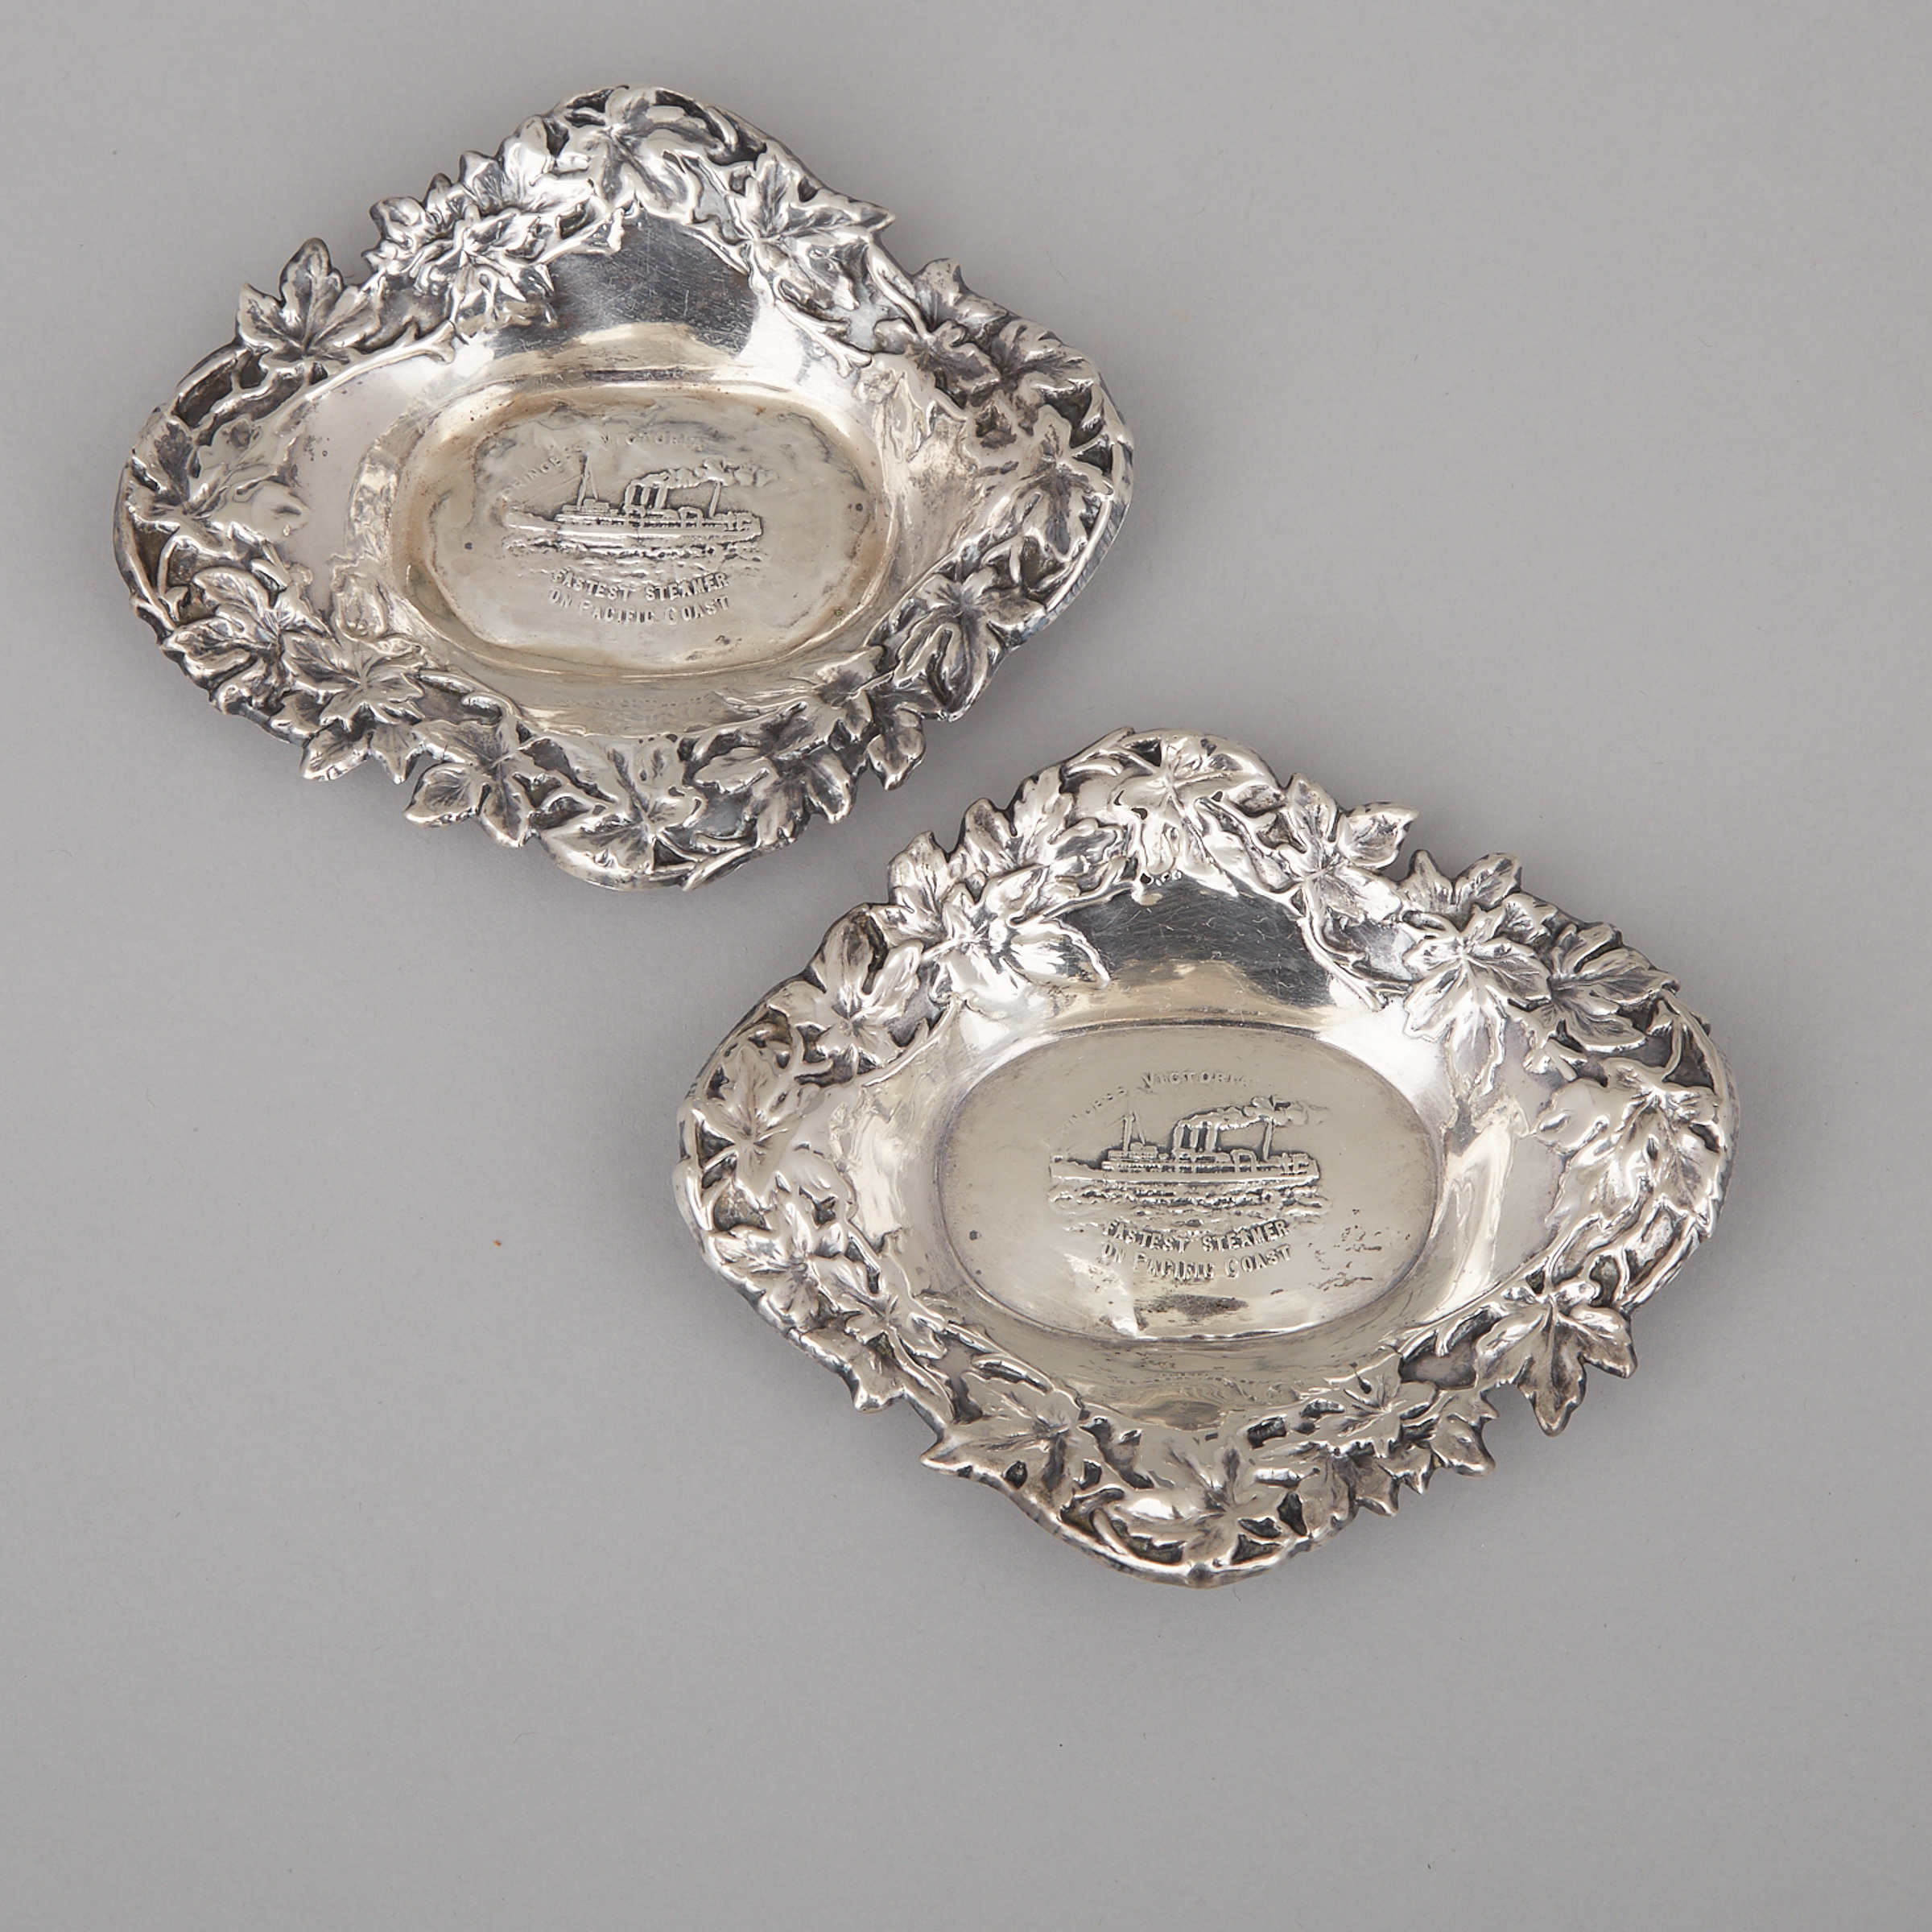 Two Canadian Pacific Railways SS Princess Victoria Silver Nut Dishes, 1929